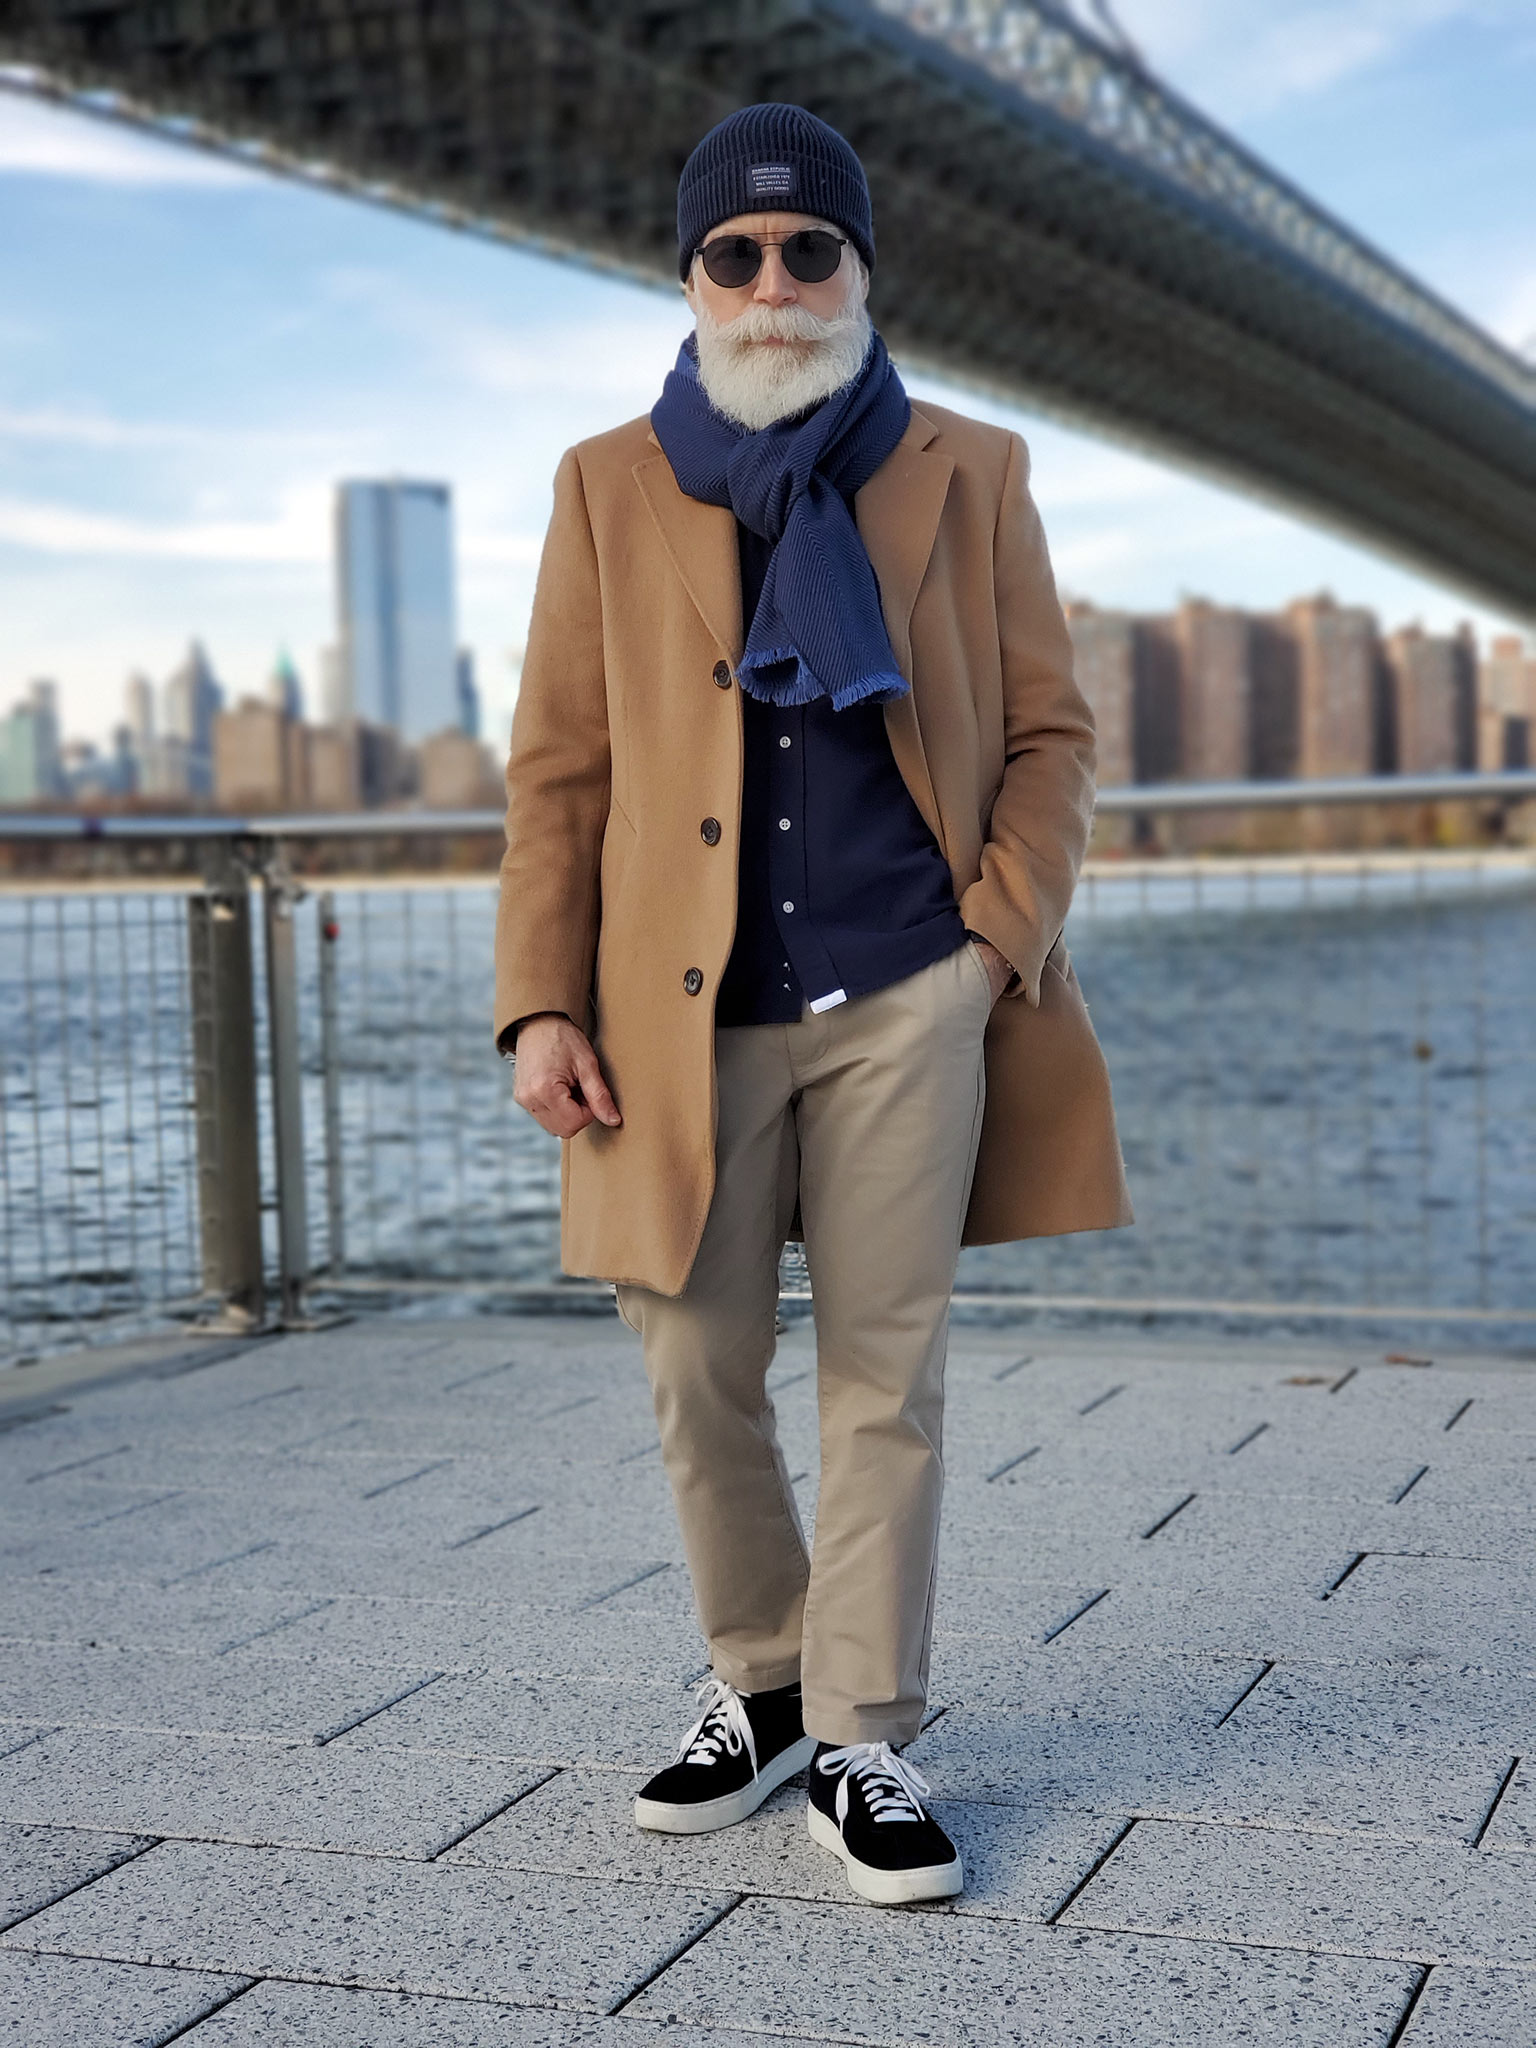 How to Wear Chinos: Everything You Need to Know